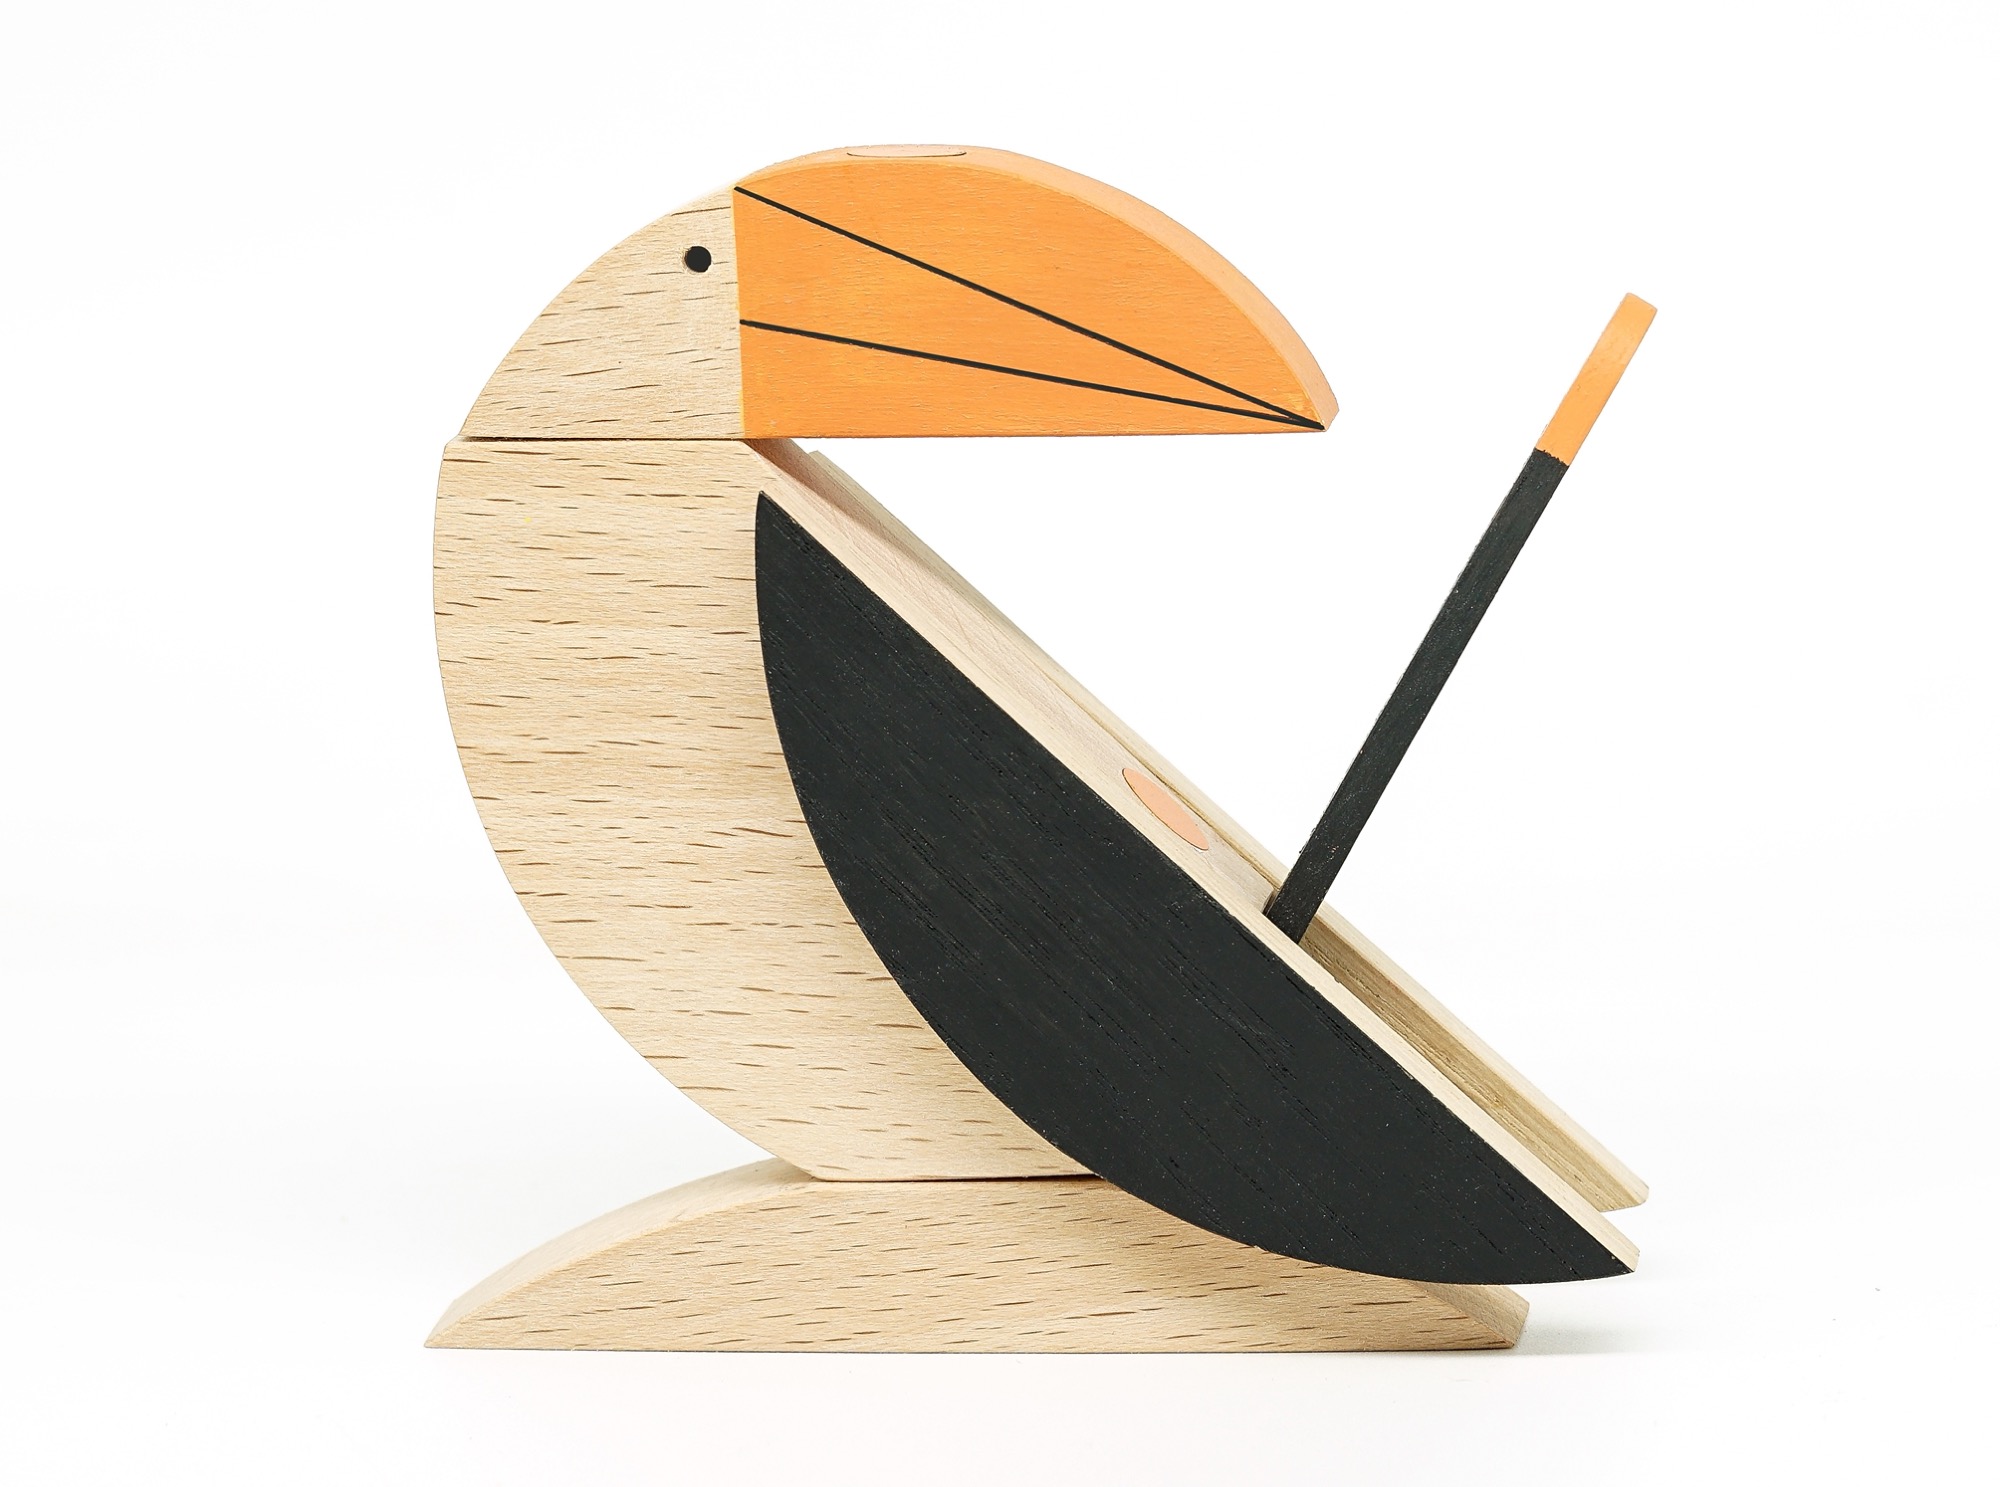 a geometric wooden toy of a toucan